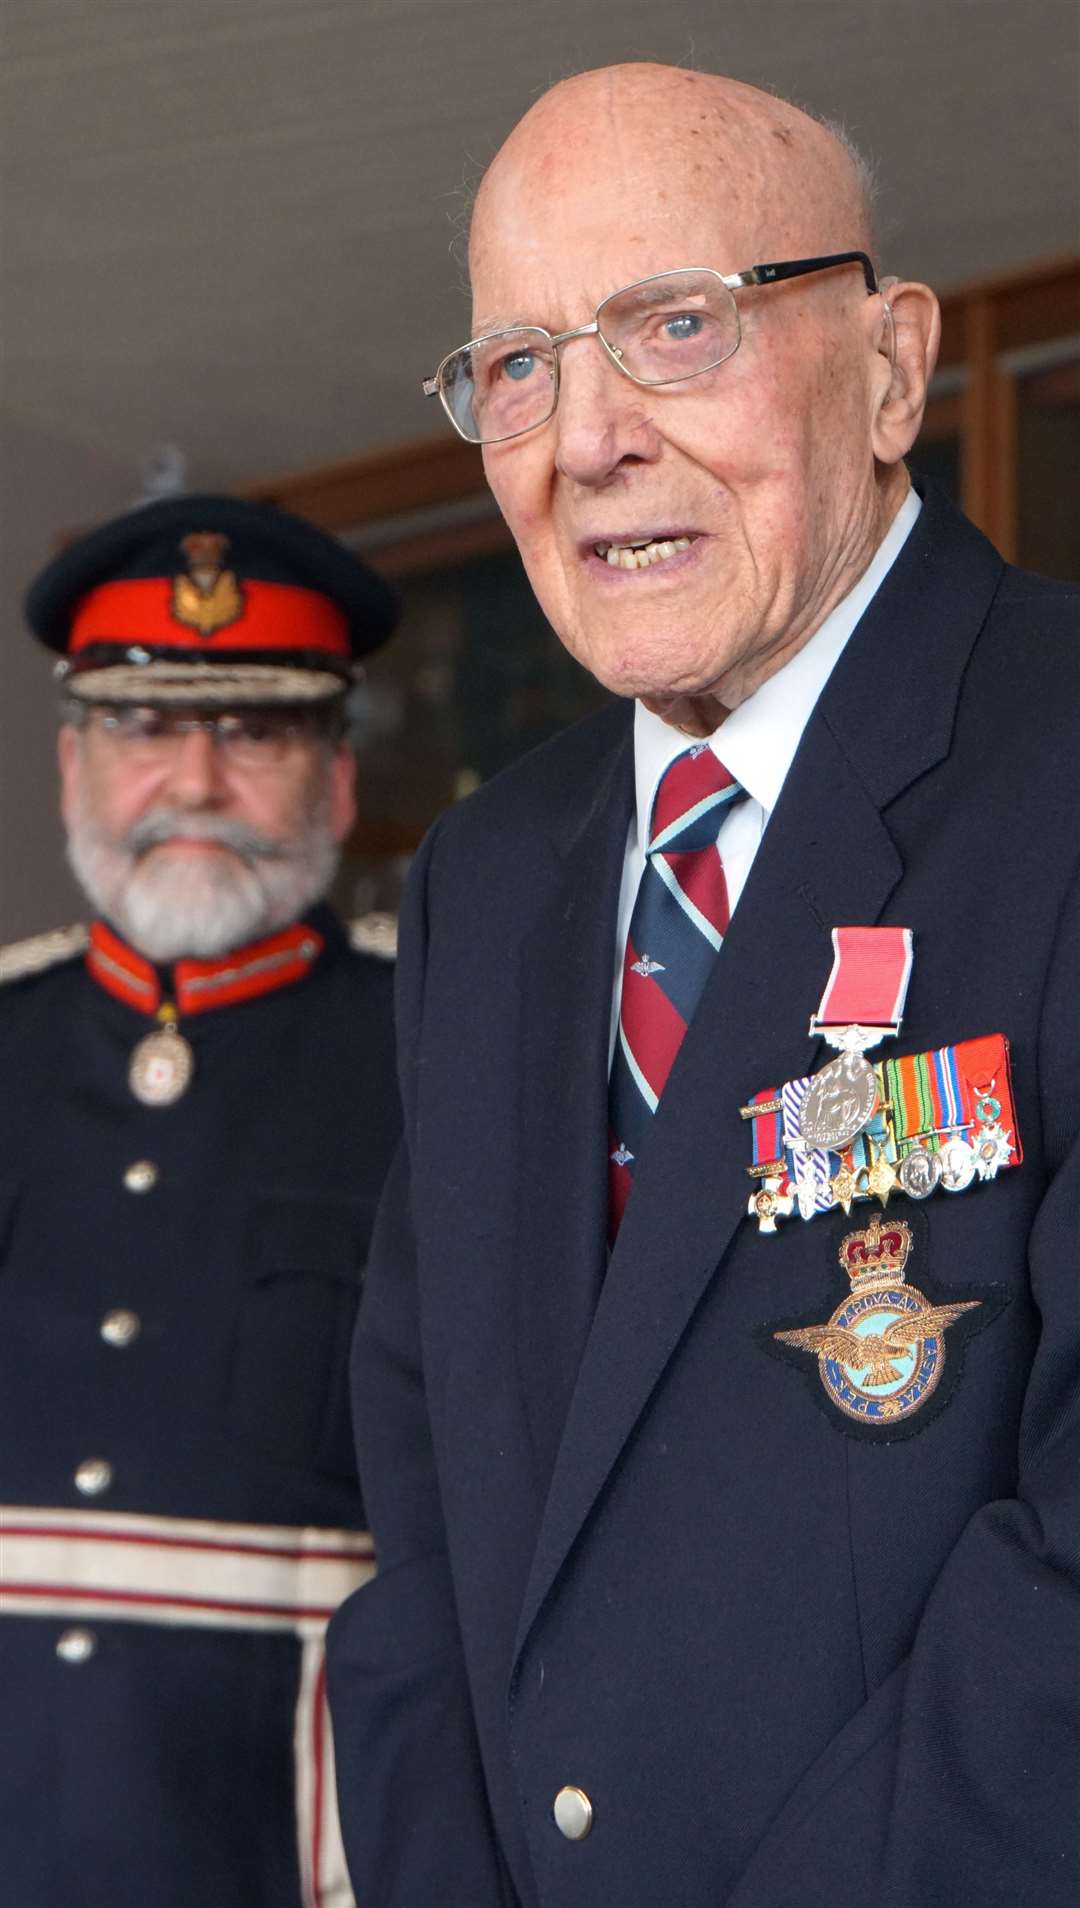 Don Mason addresses the audience moments after receiving the British Empire Medal from the Lord Lieutenant of Caithness, Lord Thurso at an event in 2019. Pictures: DGS